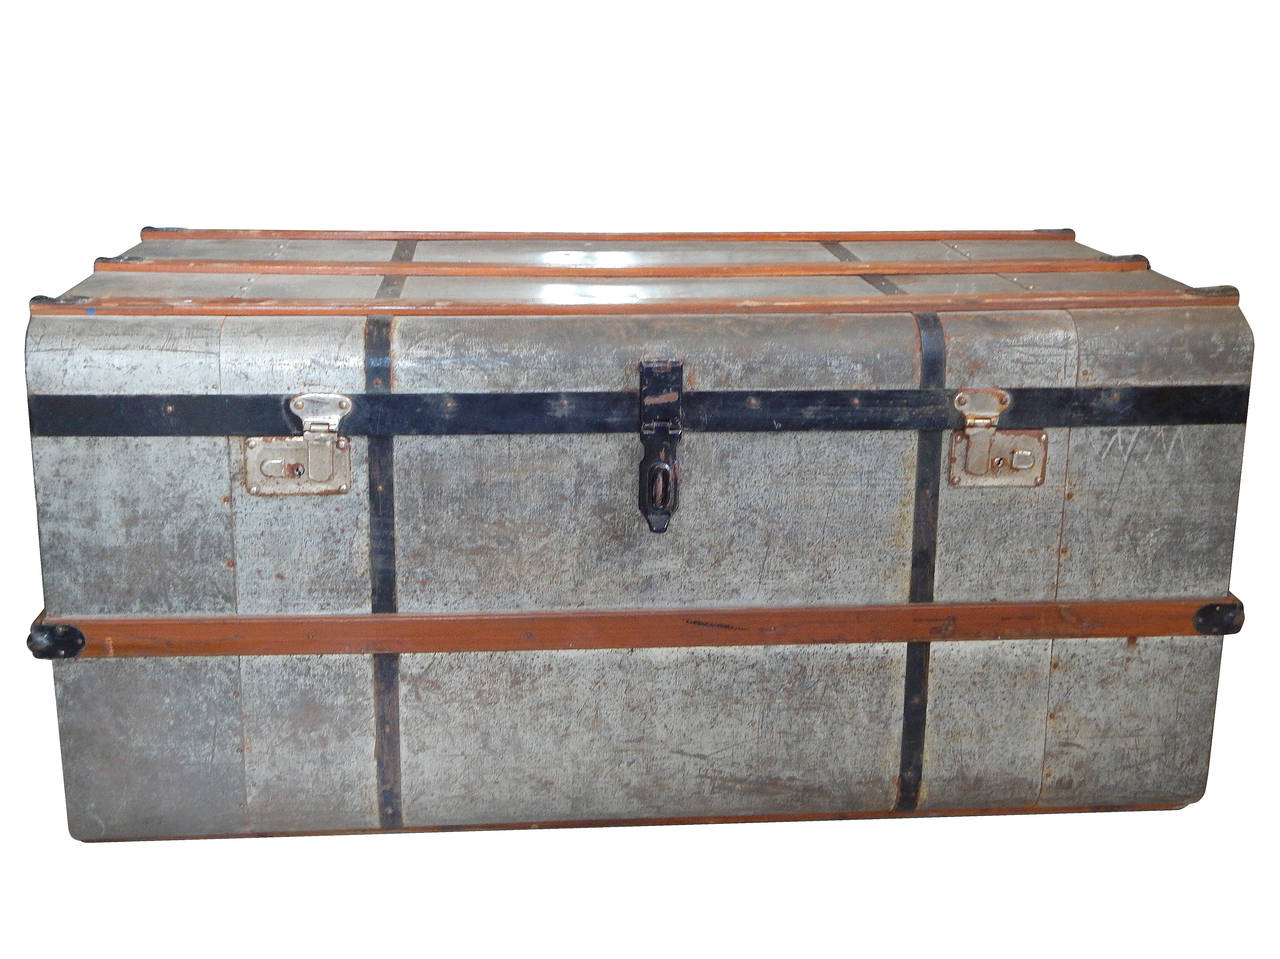 Near pair of Swedish steel trunks- can be sold separately at $800 each

Larger Trunk: 21D x 39.5W x 19H